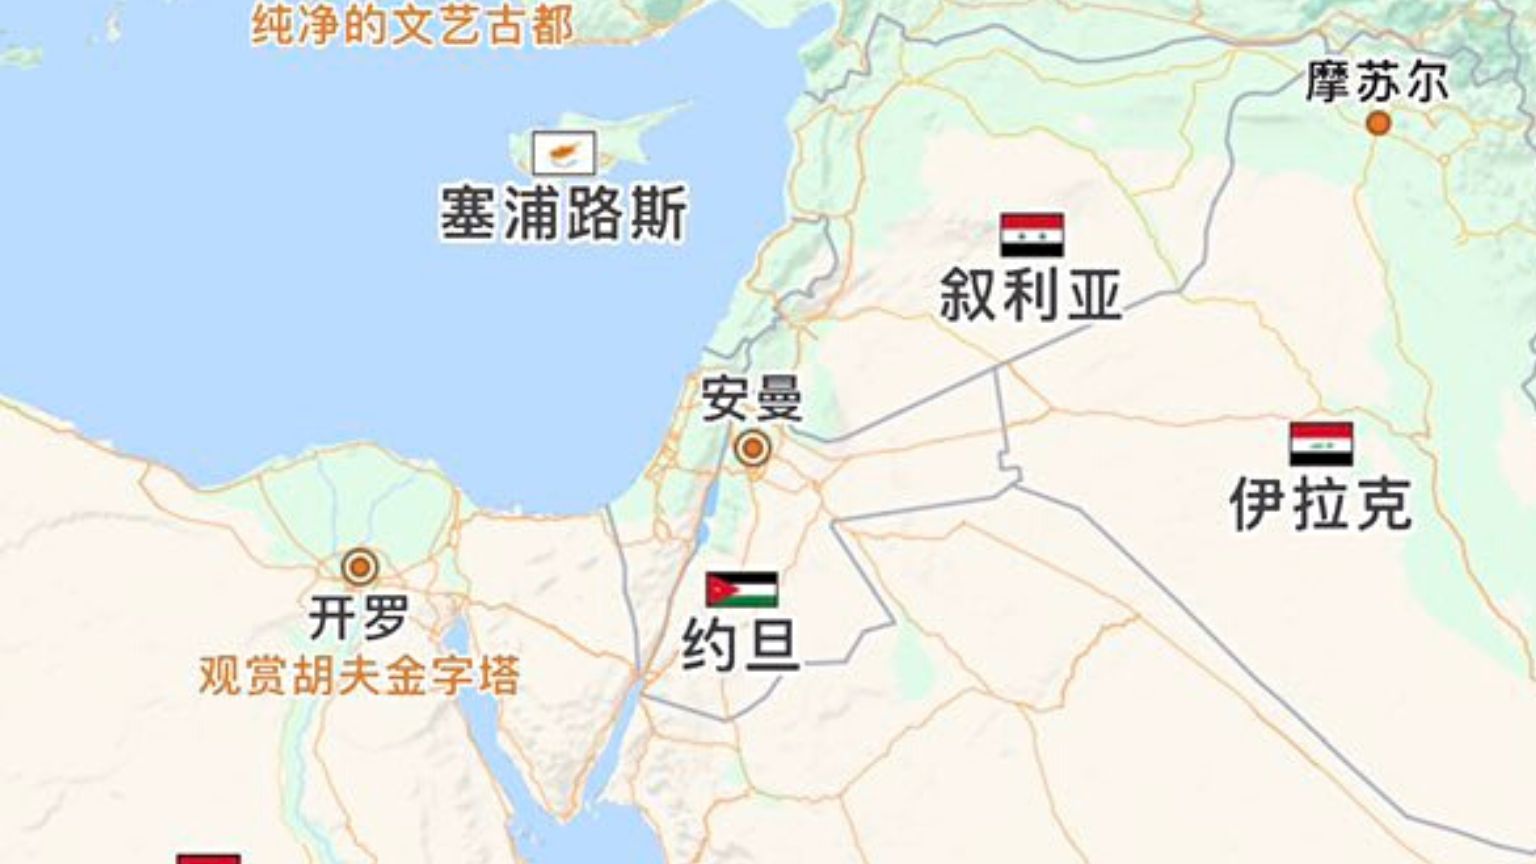 Chinese Tech Companies Baidu and Alibaba Erase Mention of Israel From Maps